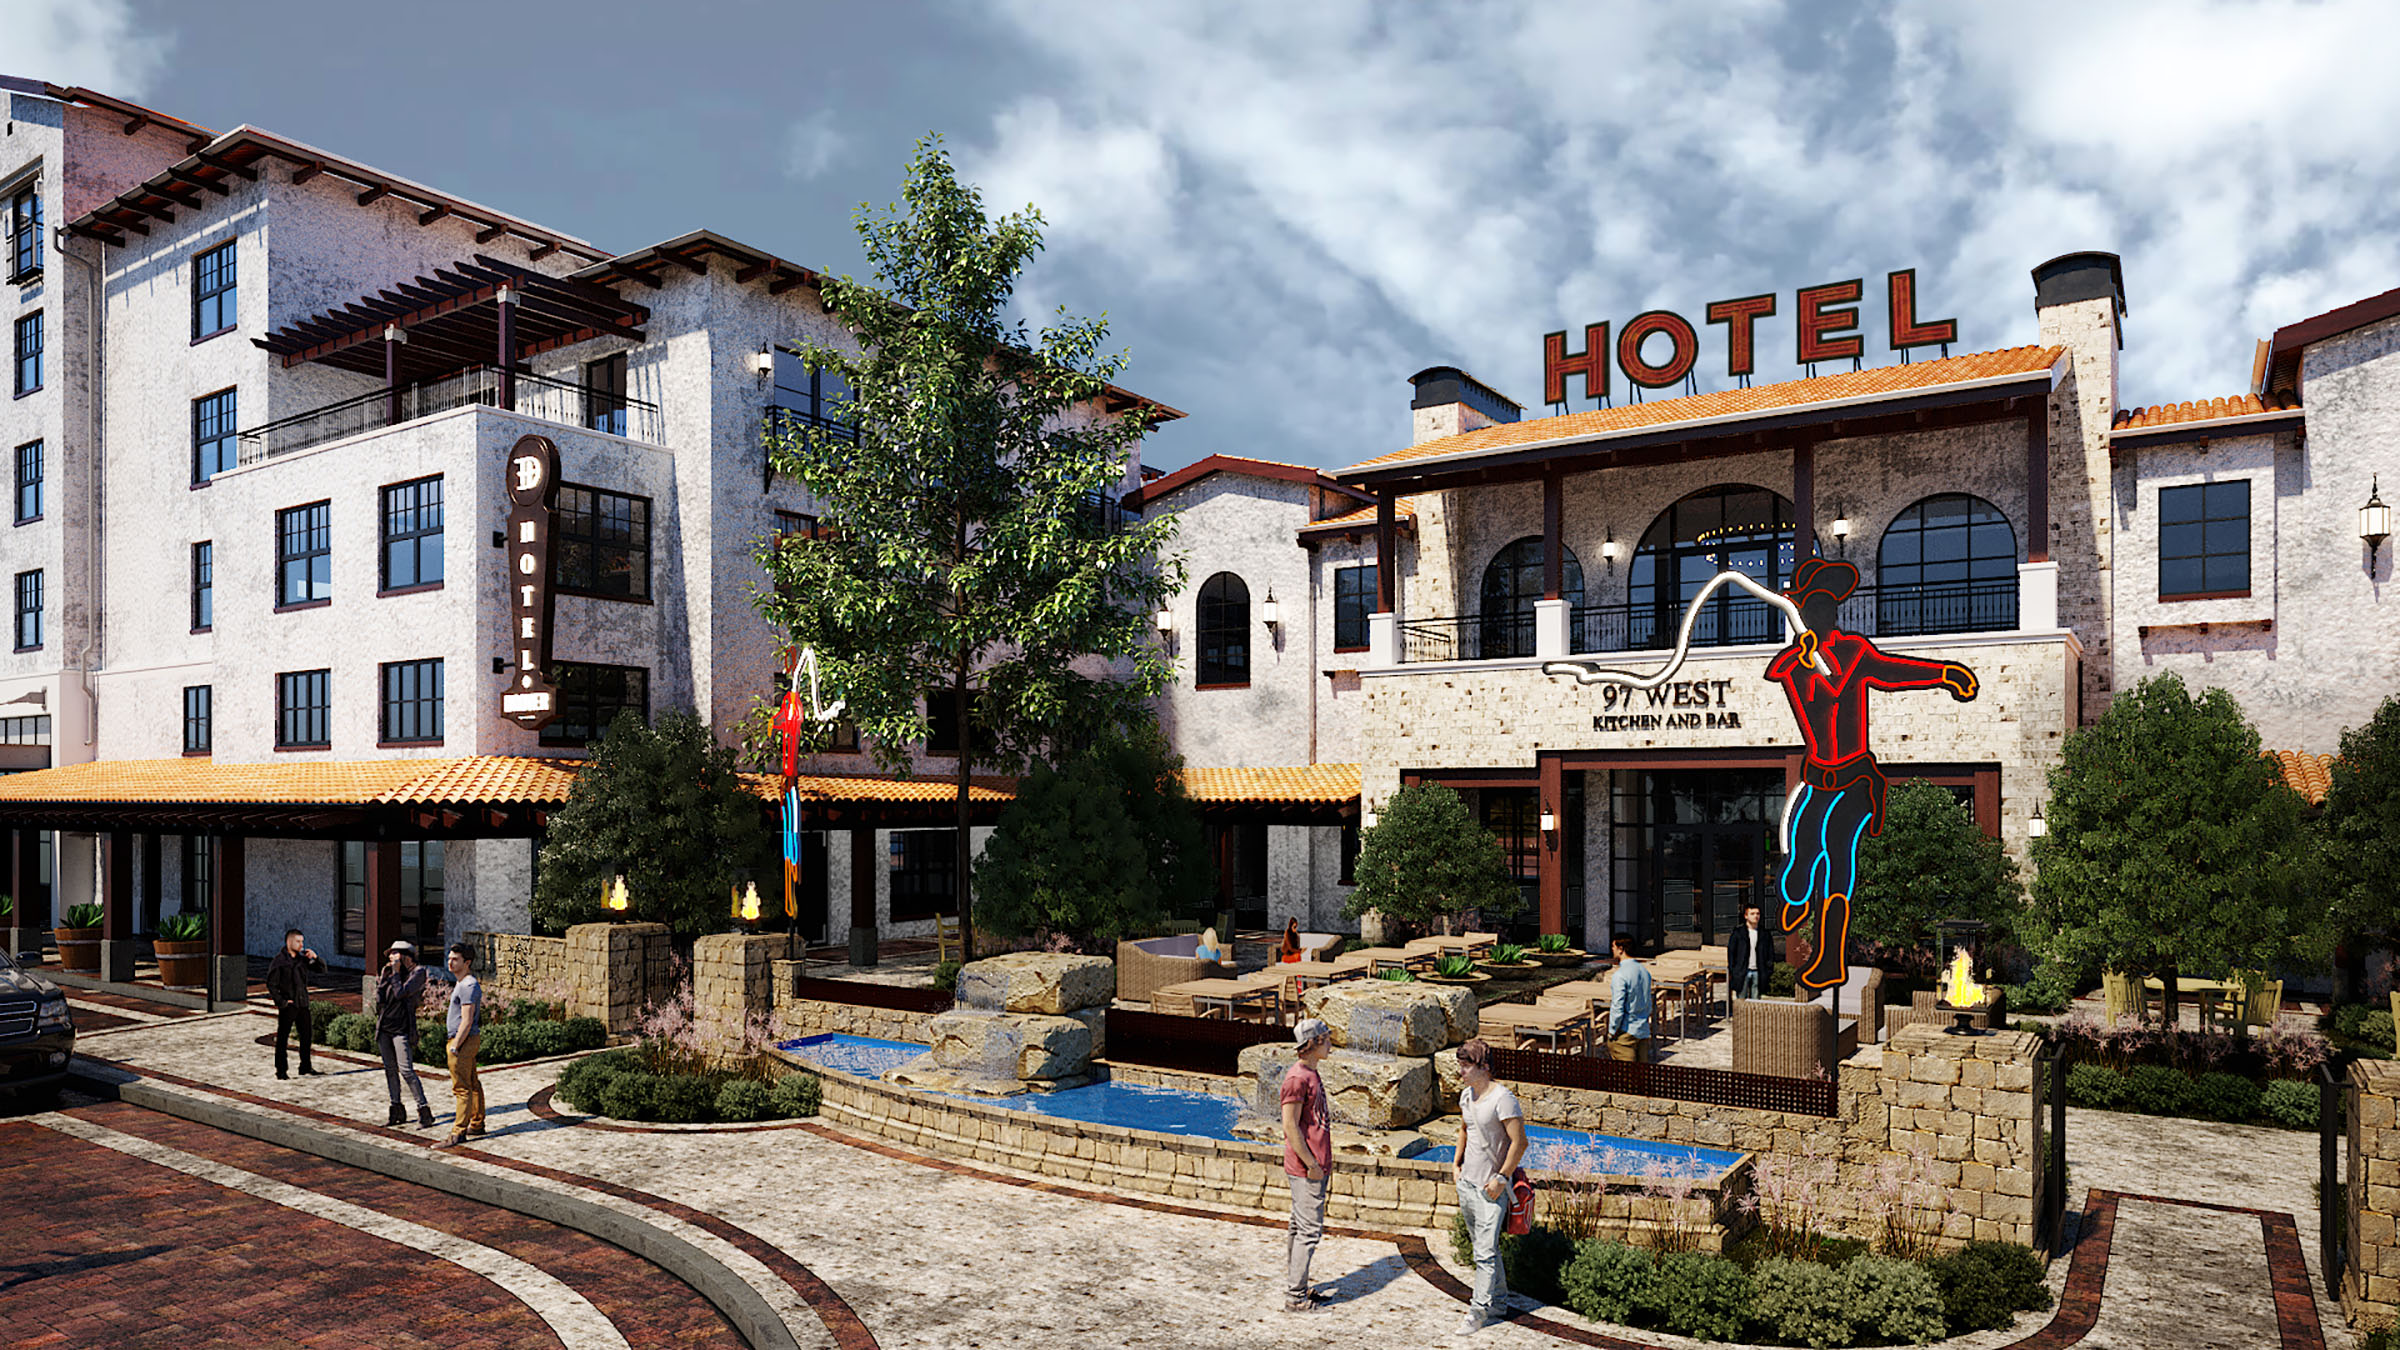 A rendering of the outside of Hotel Drover, with a white stone facade and a large sign reading "HOTEL" on the roof